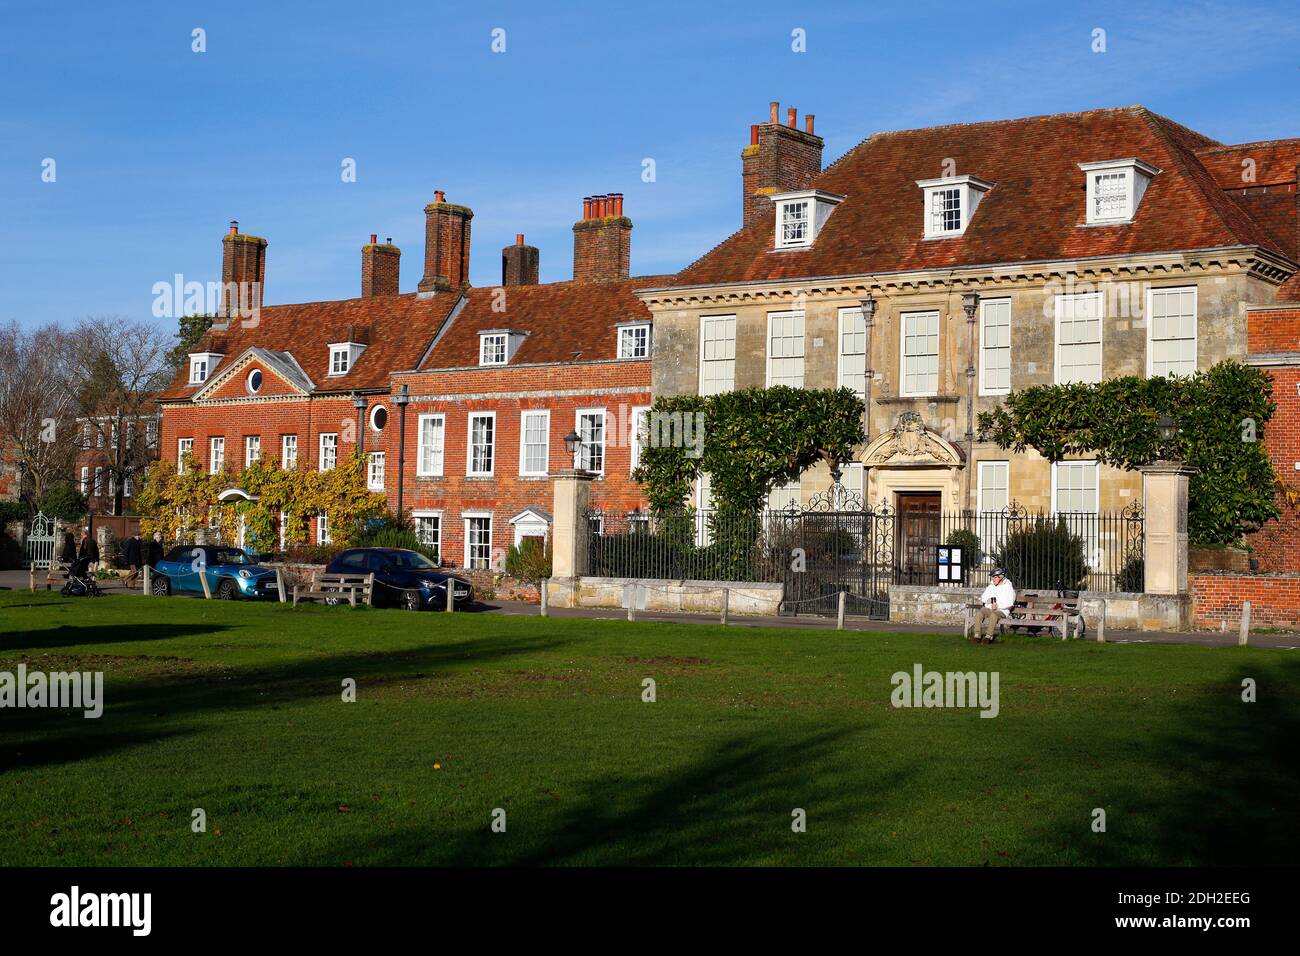 The buildings around Choristers Square near Salisbury Cathedral. Stock Photo